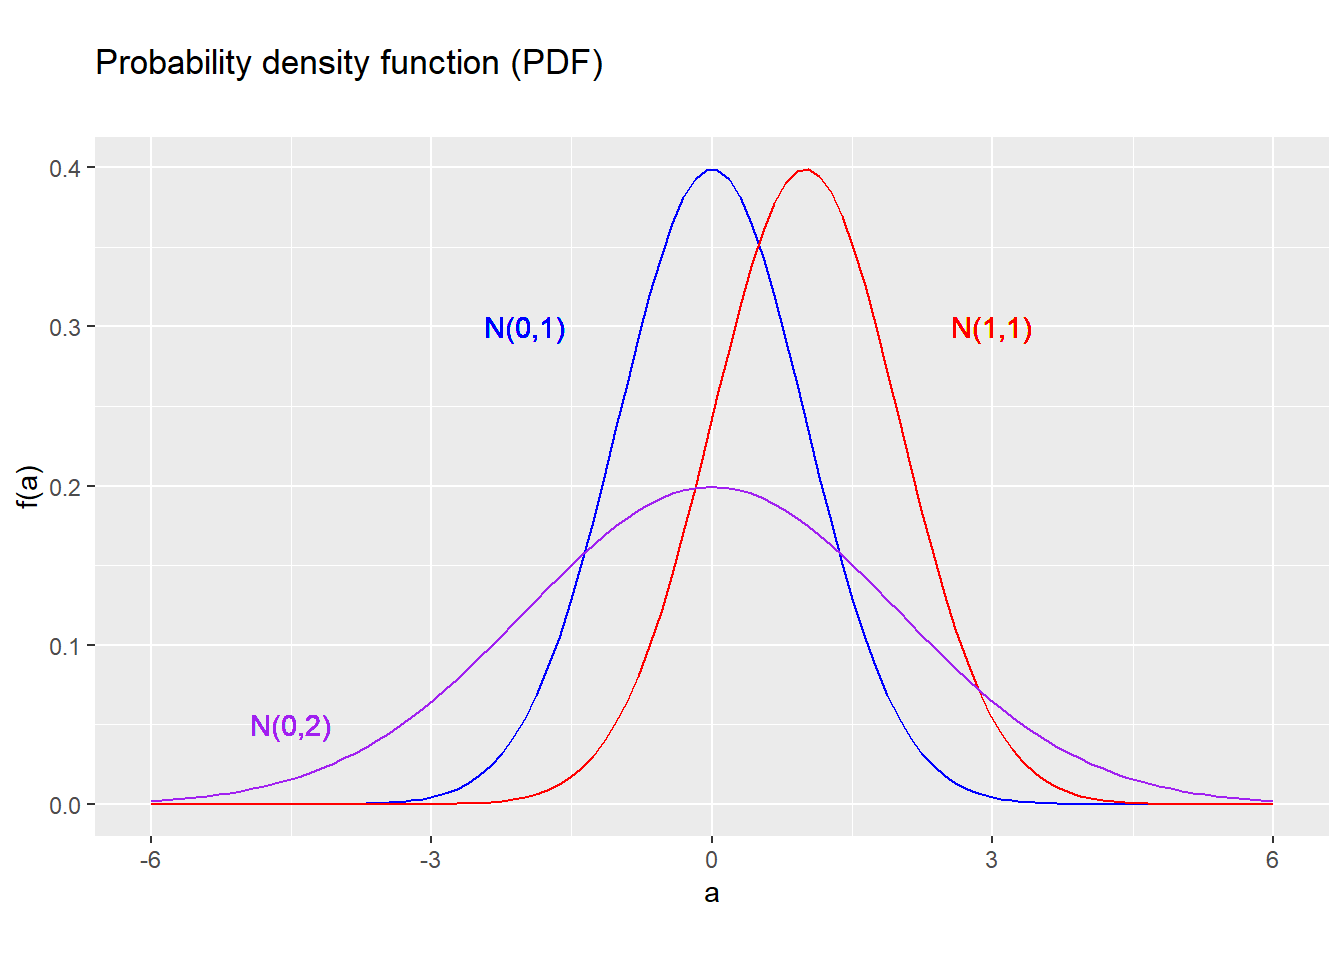 *PDF for several normal distributions*